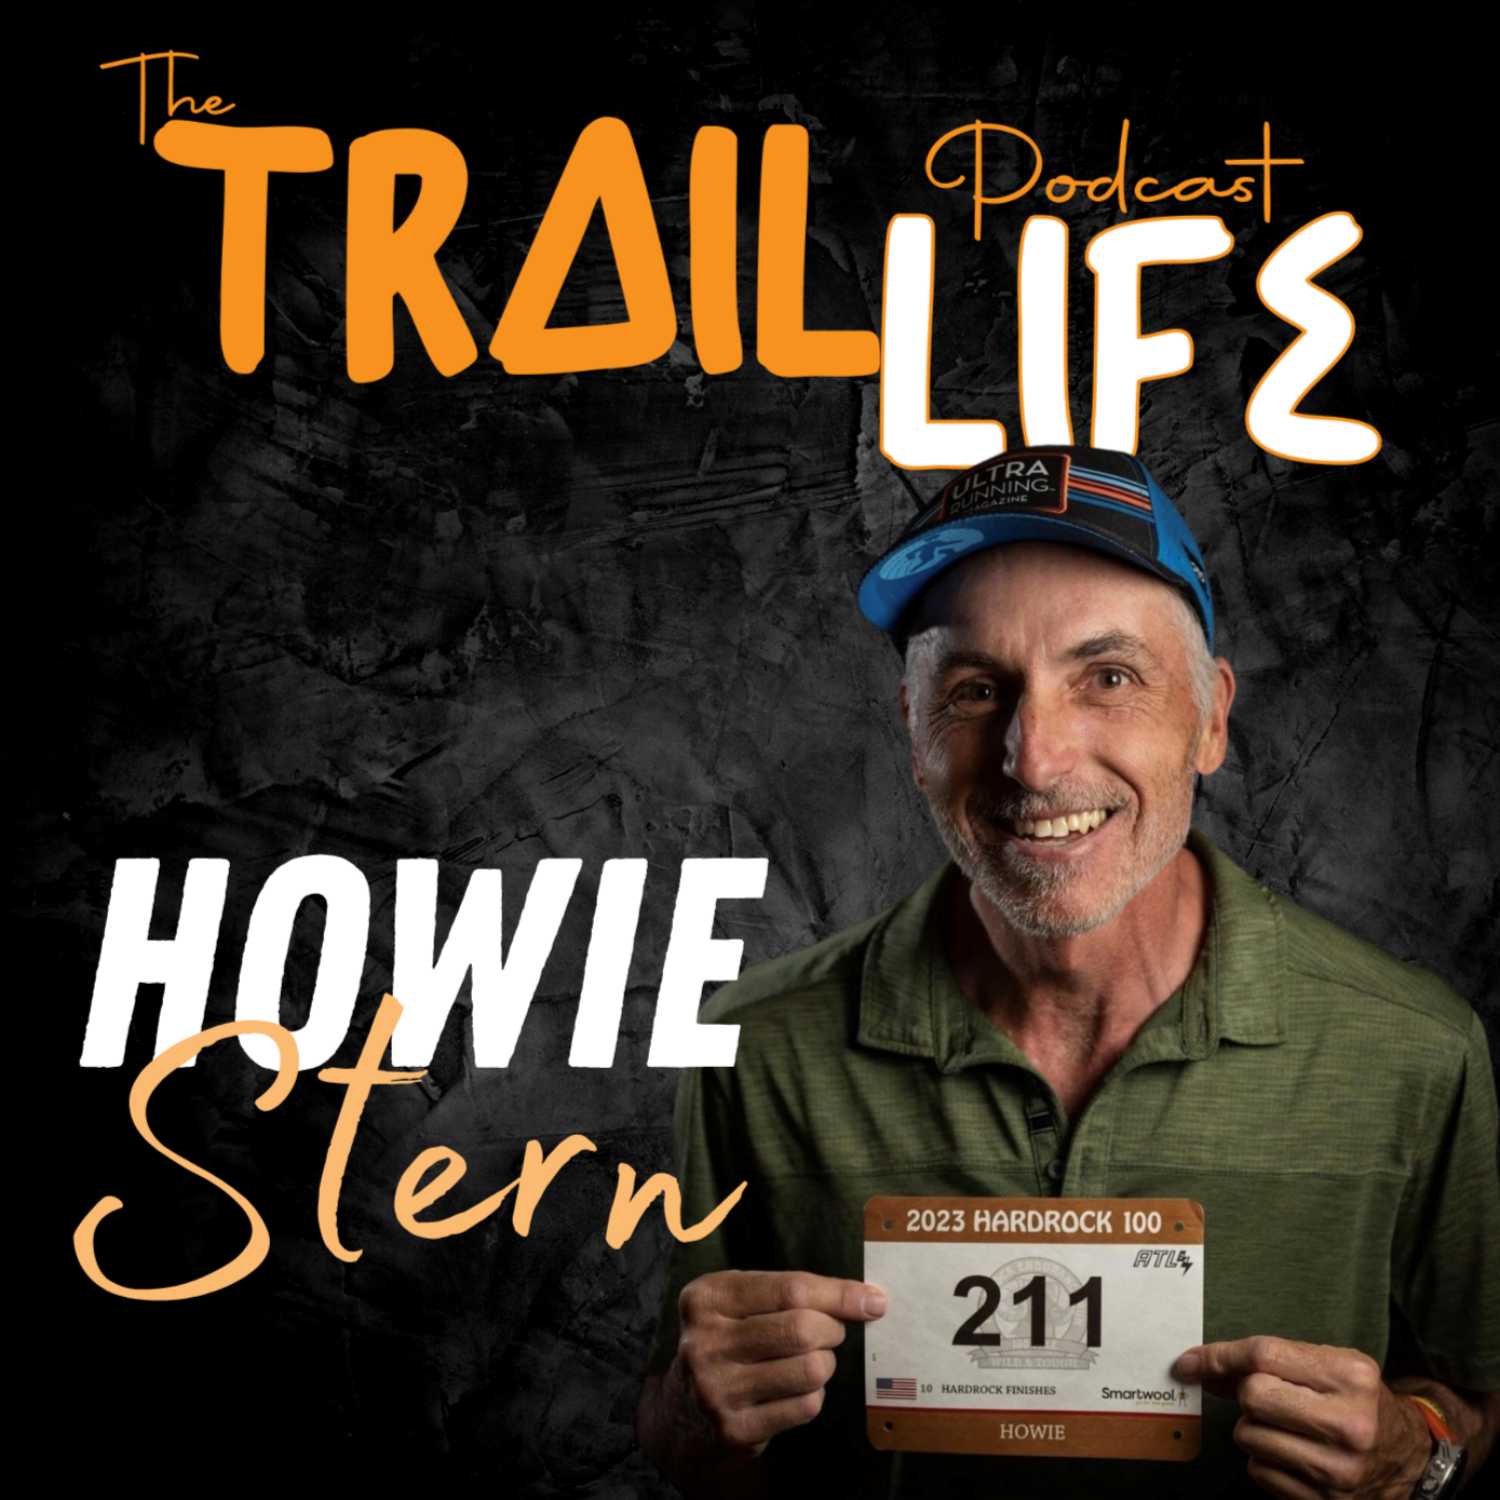 Howie Stern- A Storyteller behind the Camera